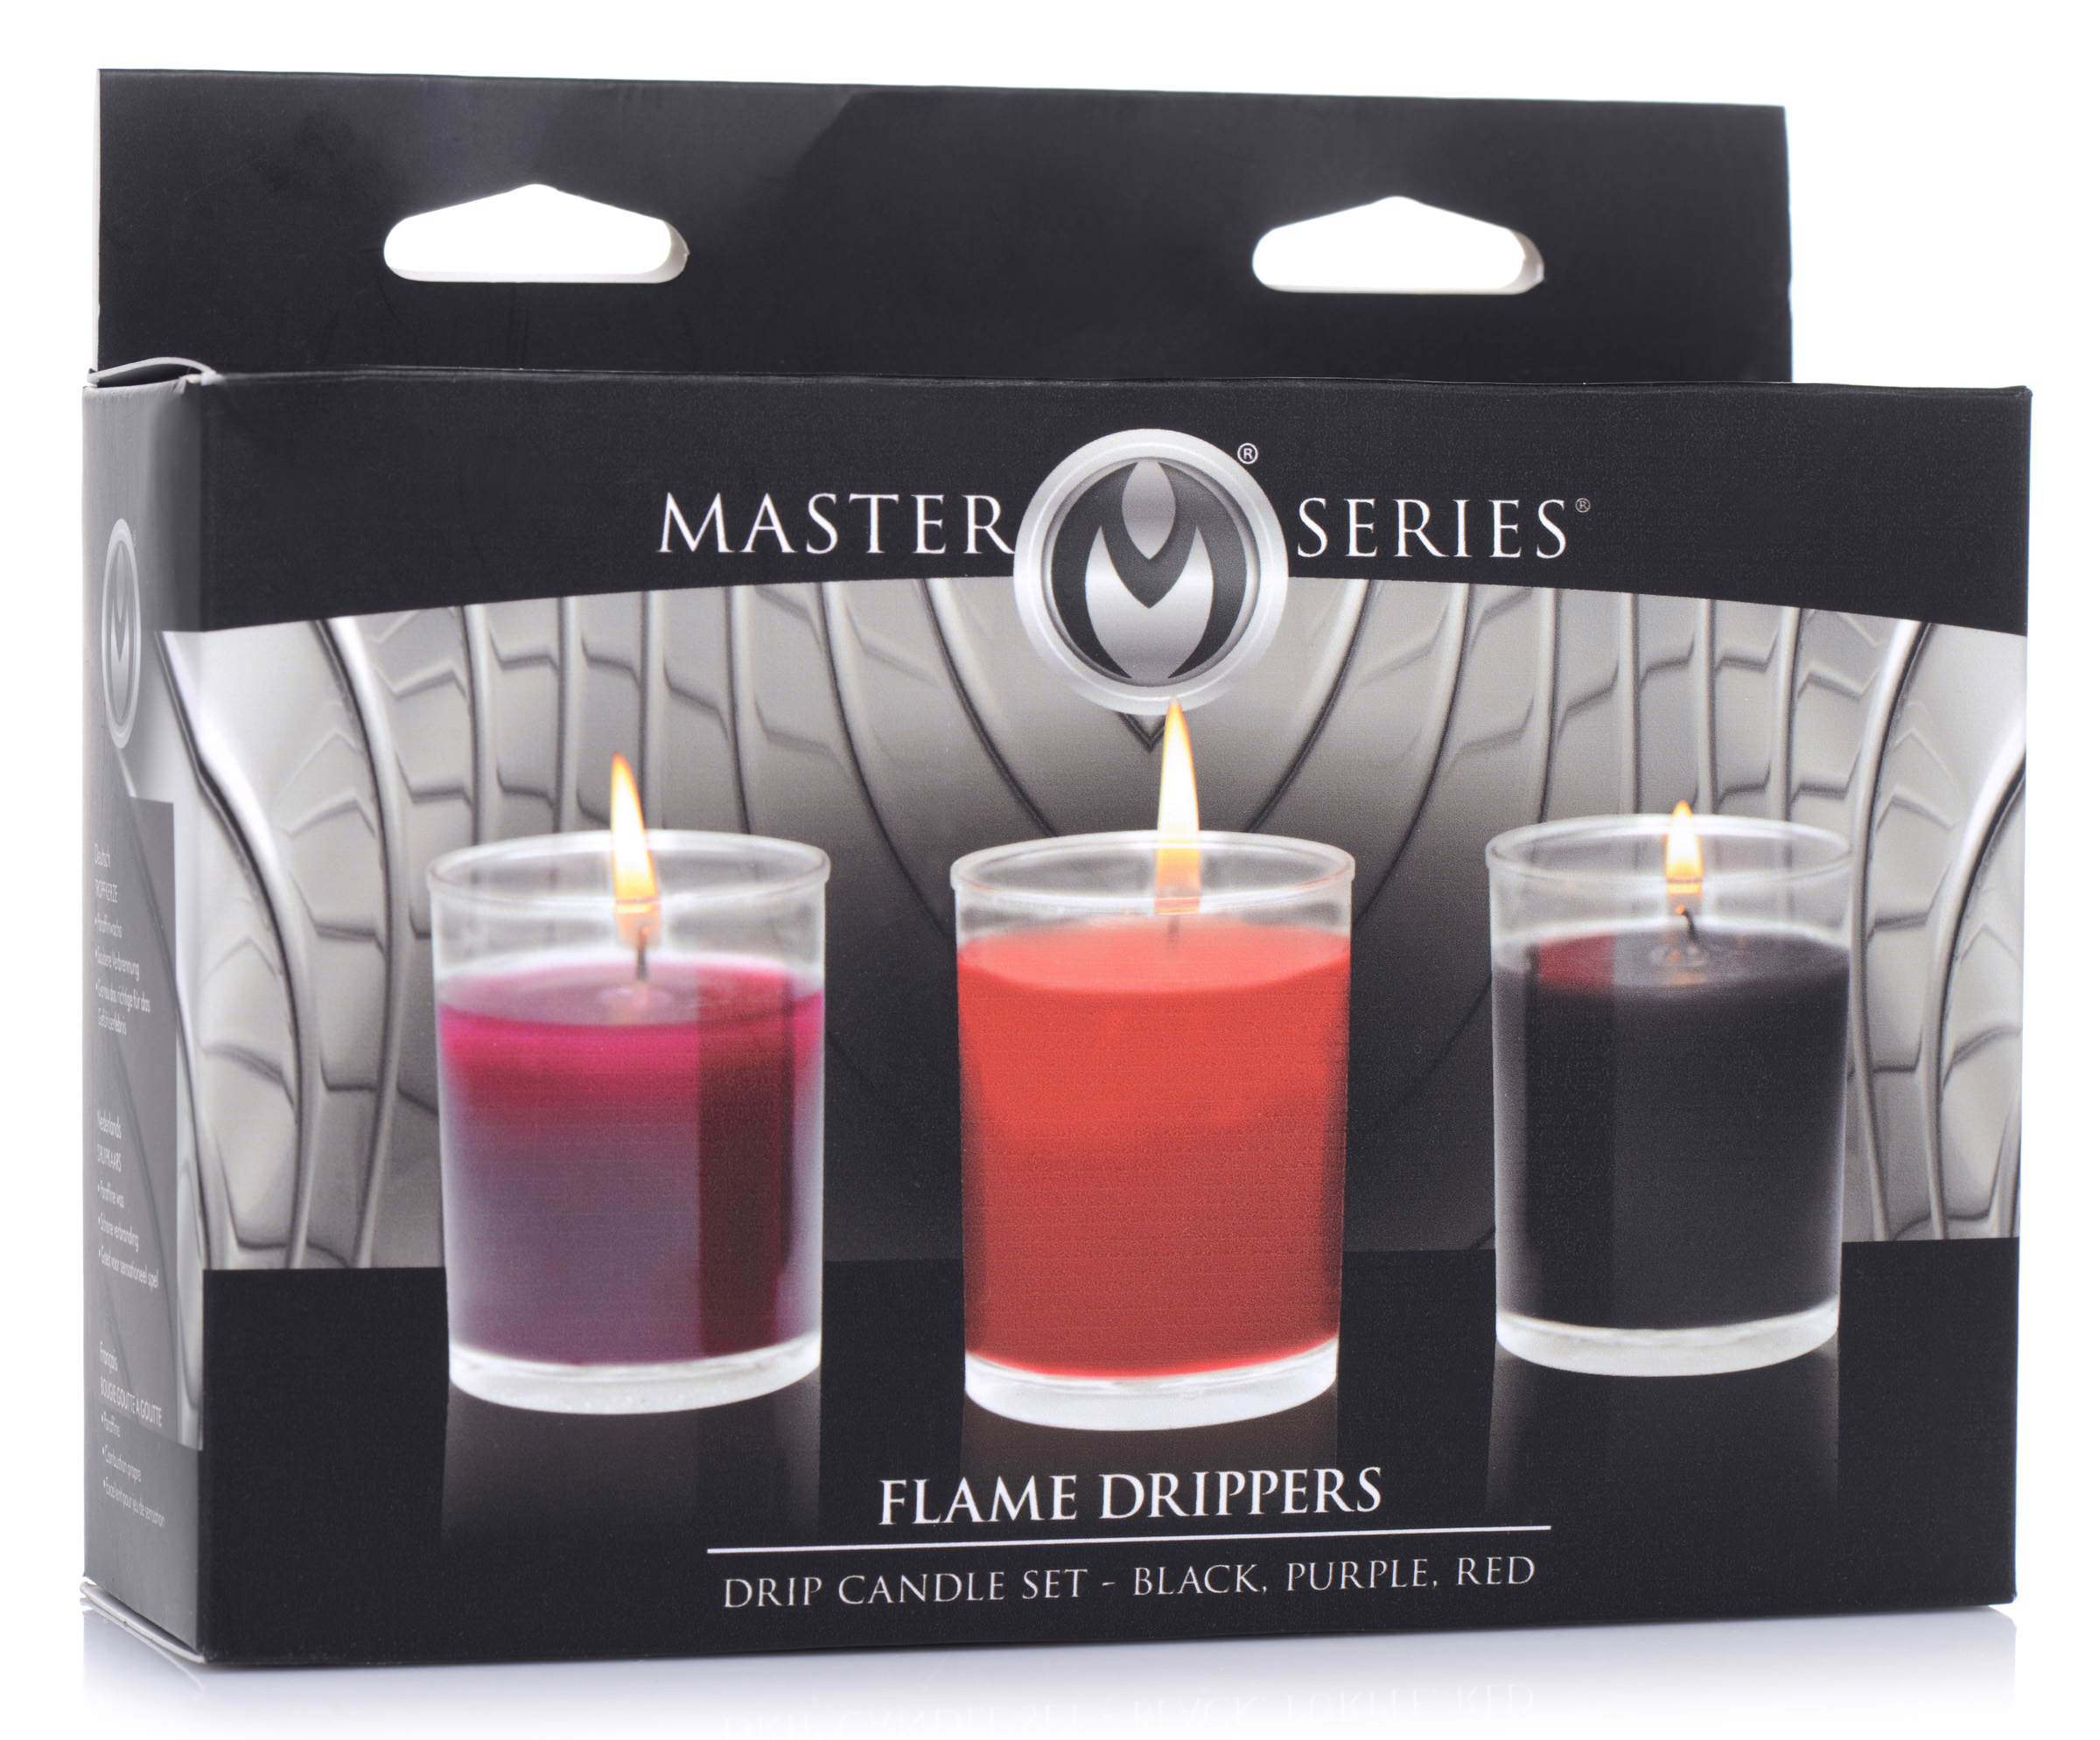 MSAG652 Flame Drippers Candle Set Designed For Wax Play Honeys Place